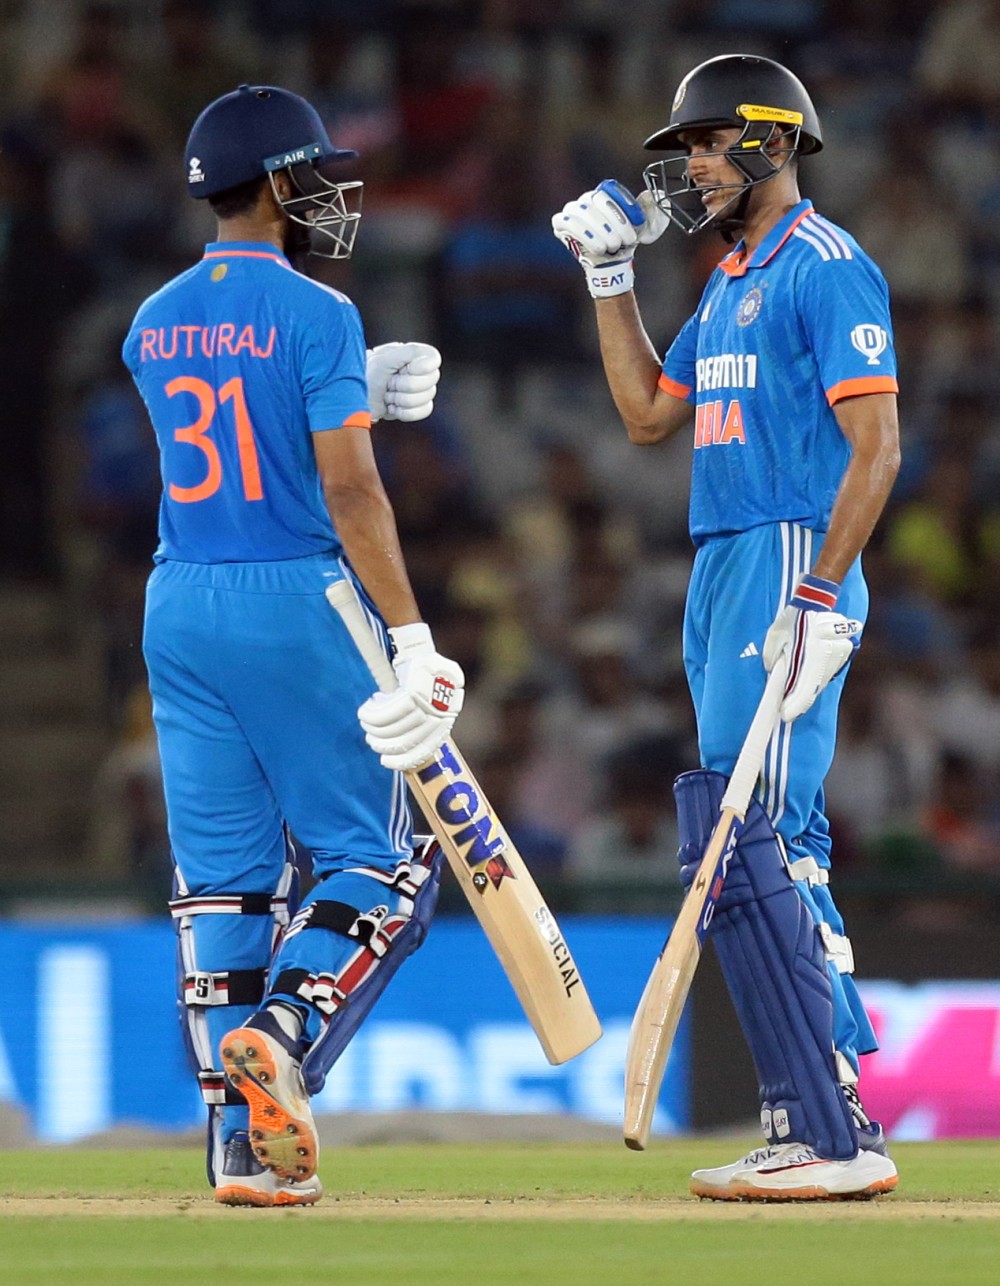 India's Shubman Gill and Ruturaj Gaikwad celebrate their partnership during the first ODI cricket match between India and Australia, in Mohali, on September 22. (IANS Photo)